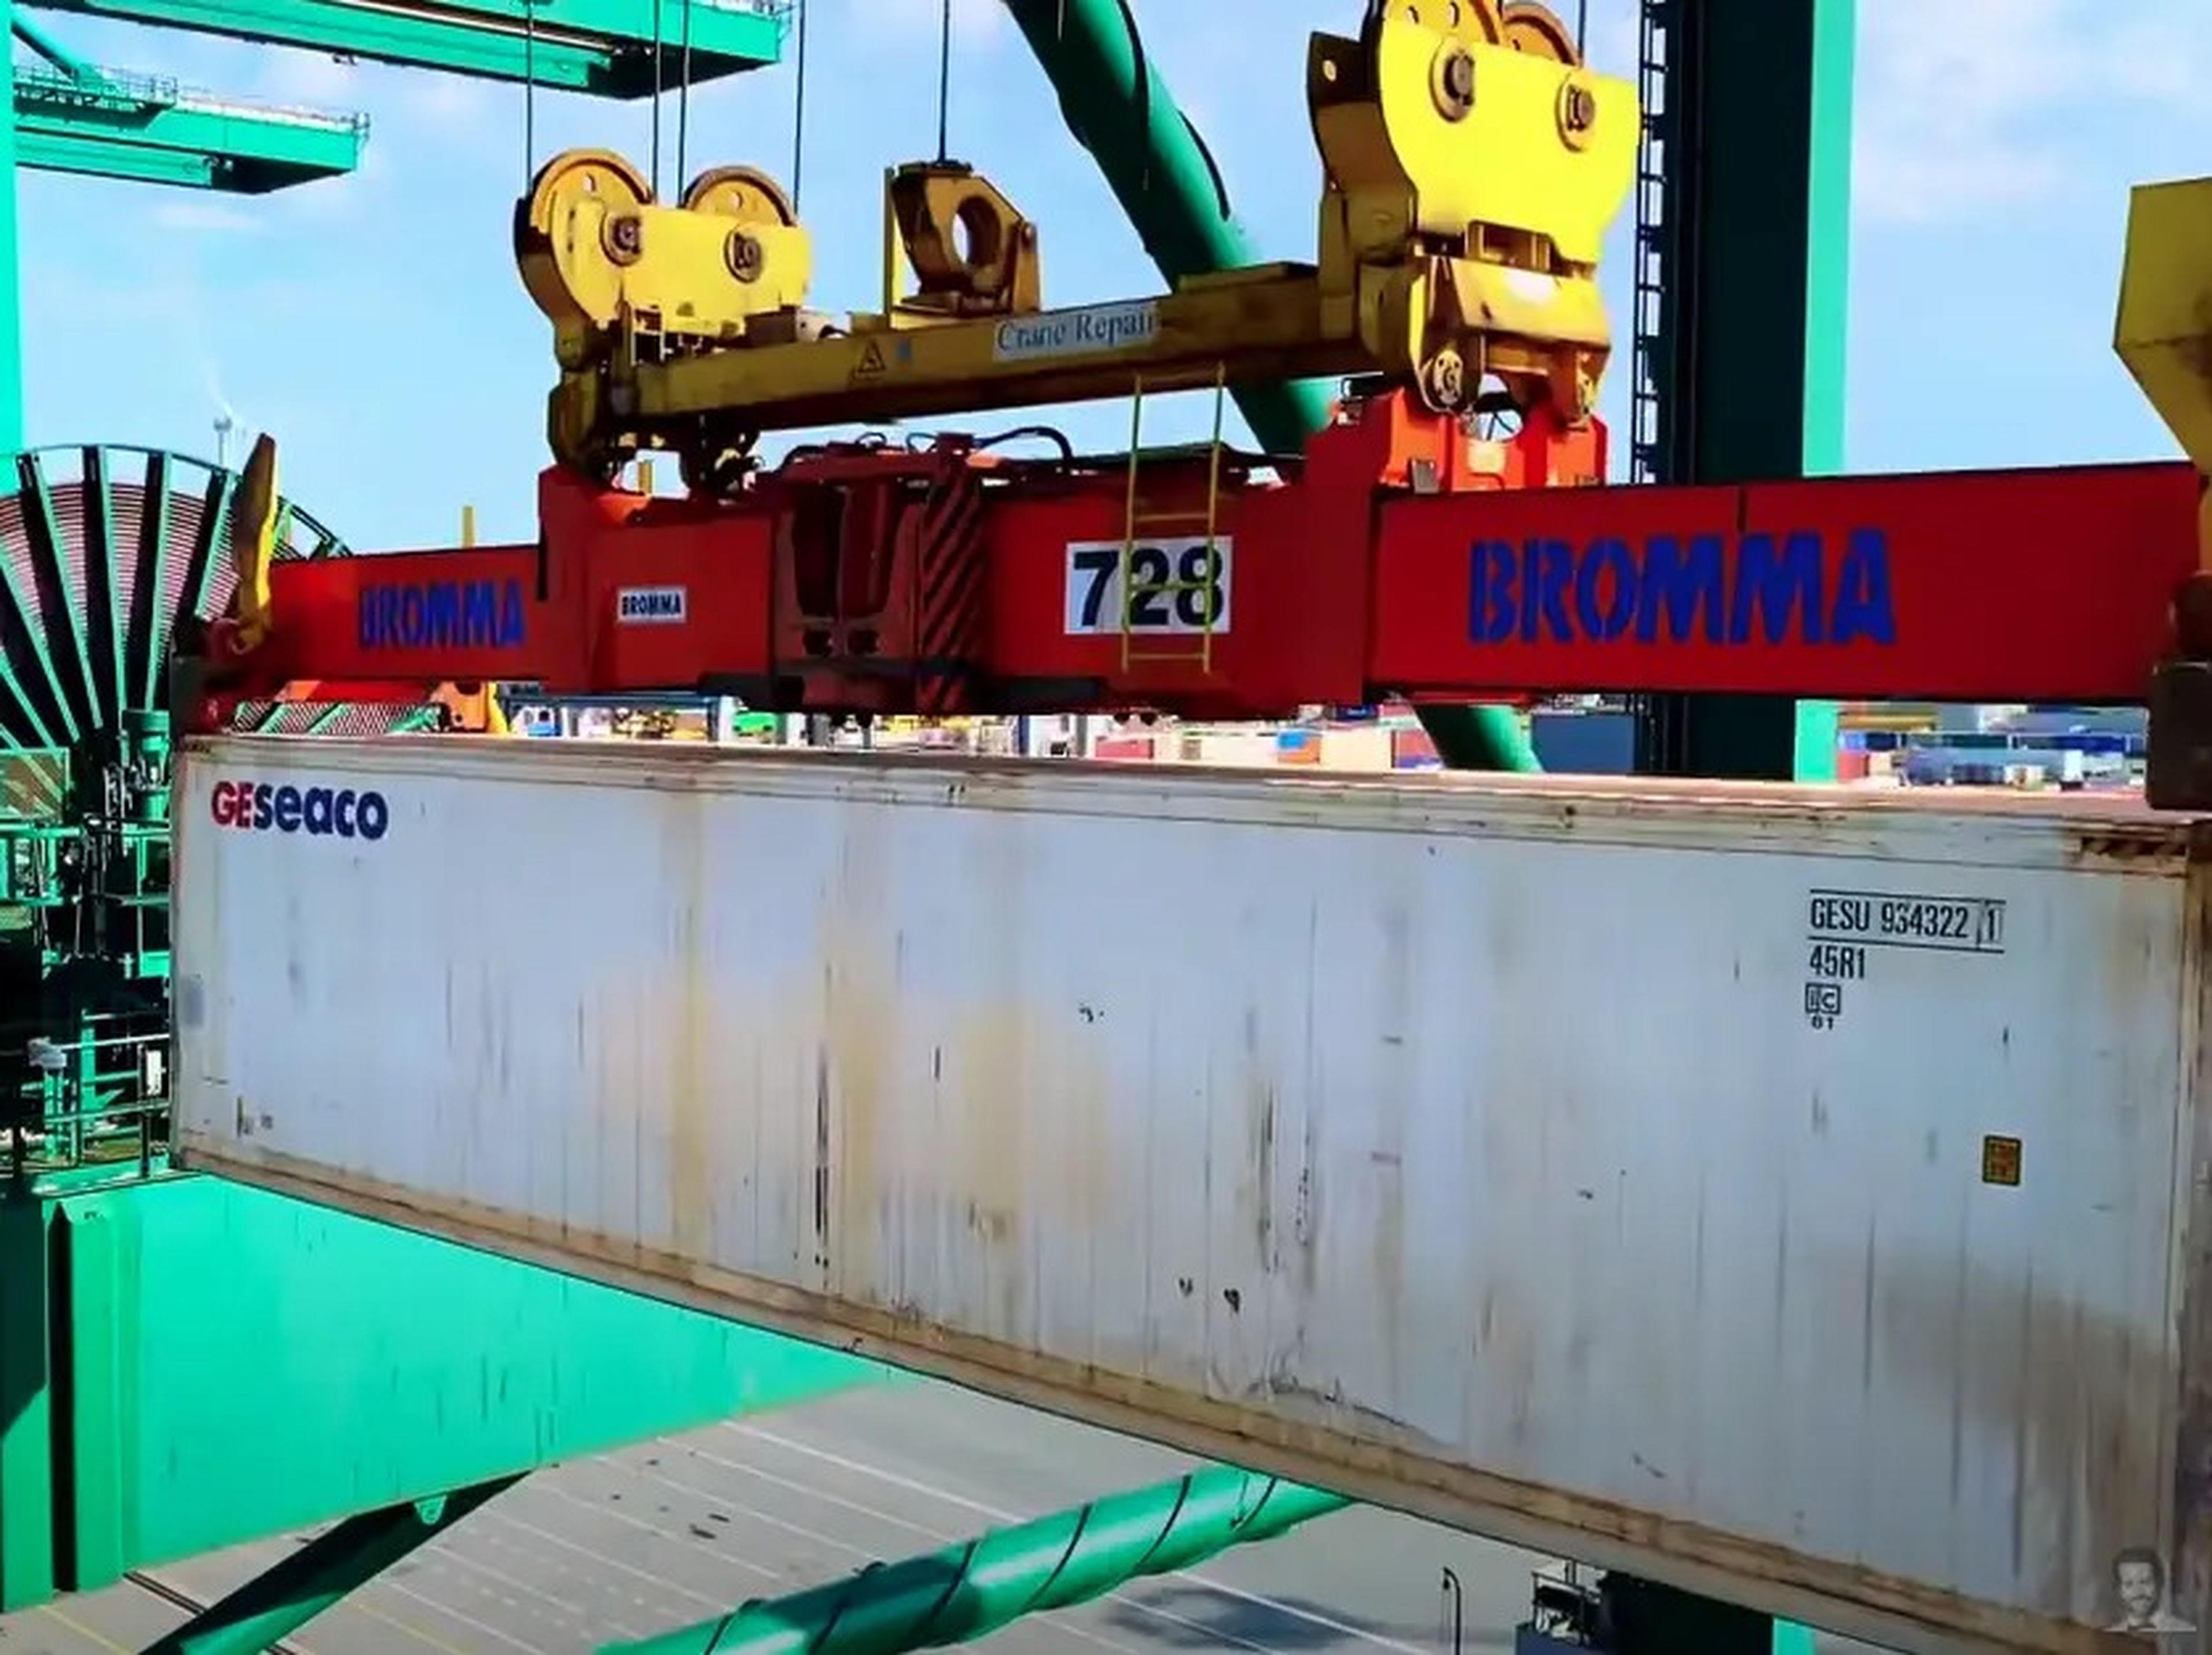 A crane takes 20-foot containers off the ship